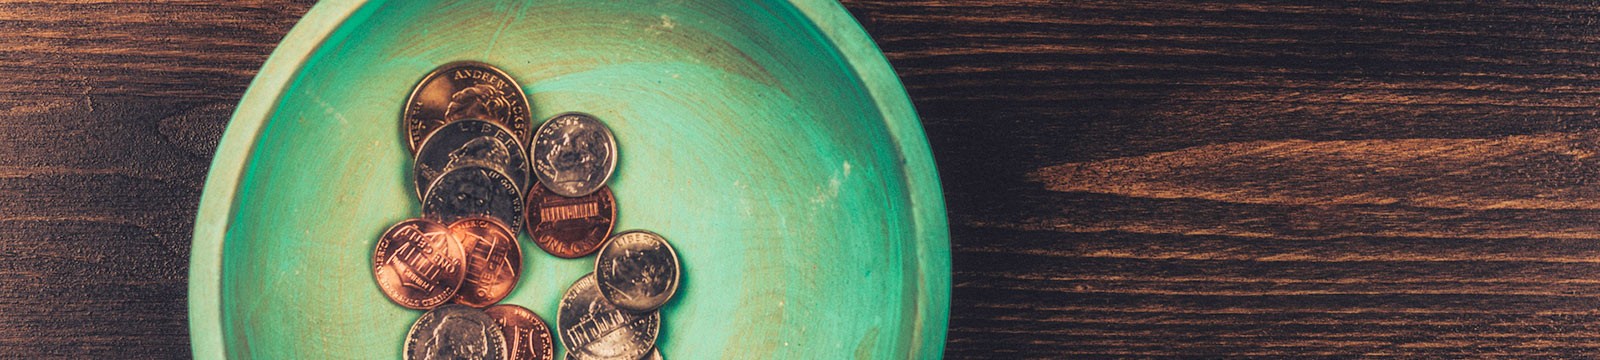 coins in a green bowl